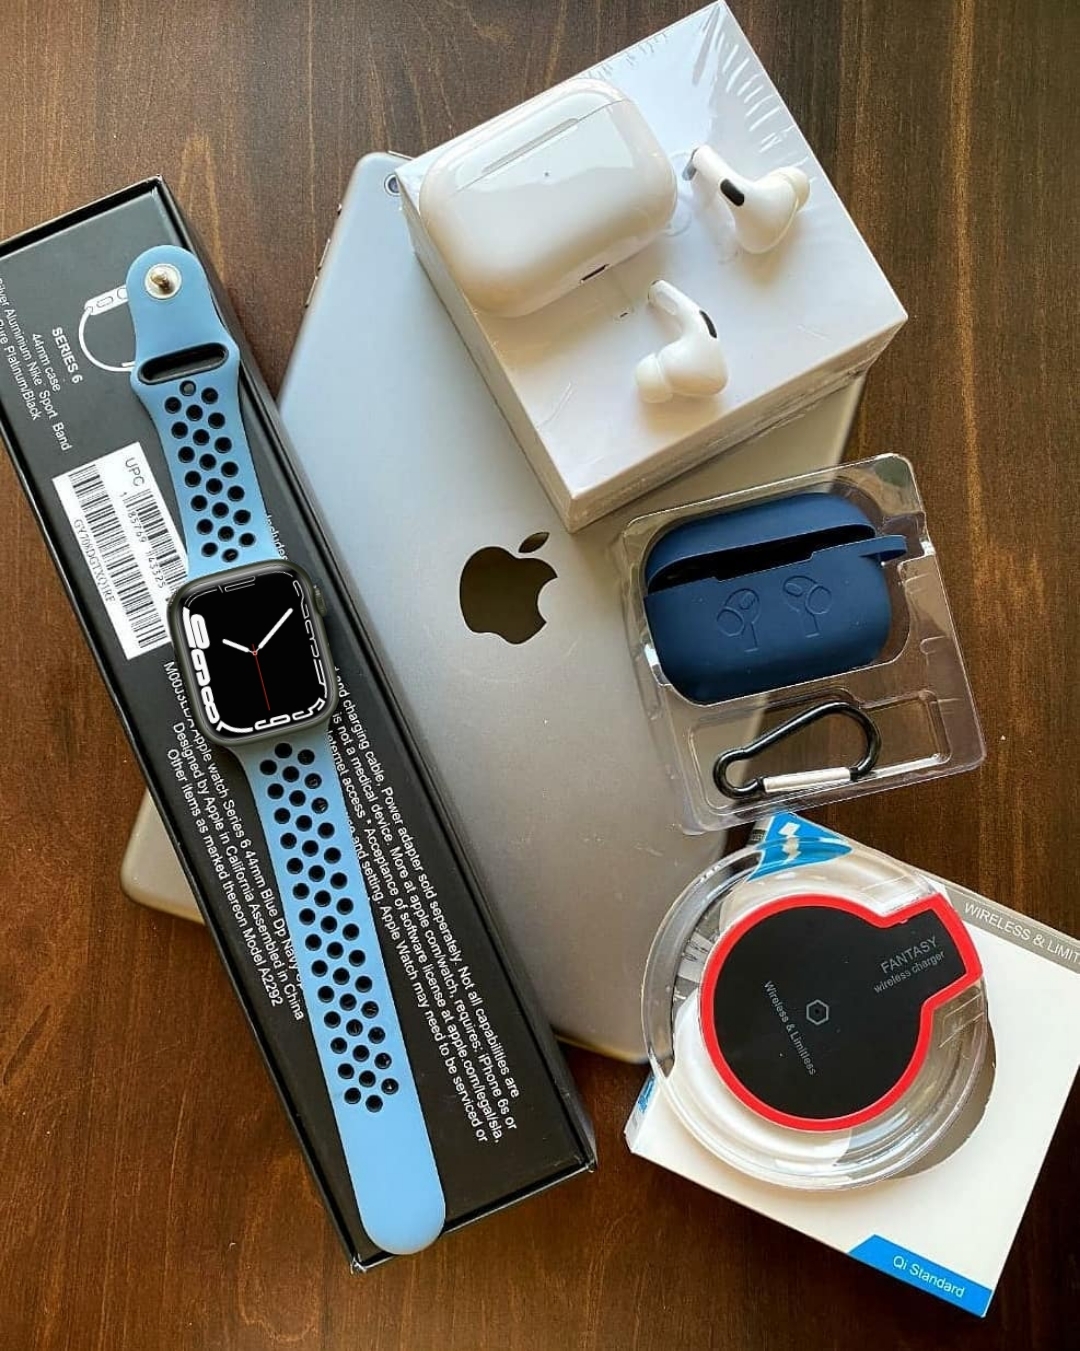 Cybzone Exclusive Combo Offer, Microwear 007 Series 7 Smartwatch, Nike Edition Strap, AirPods Pro Case, Wireless Charger And AirPods Pro